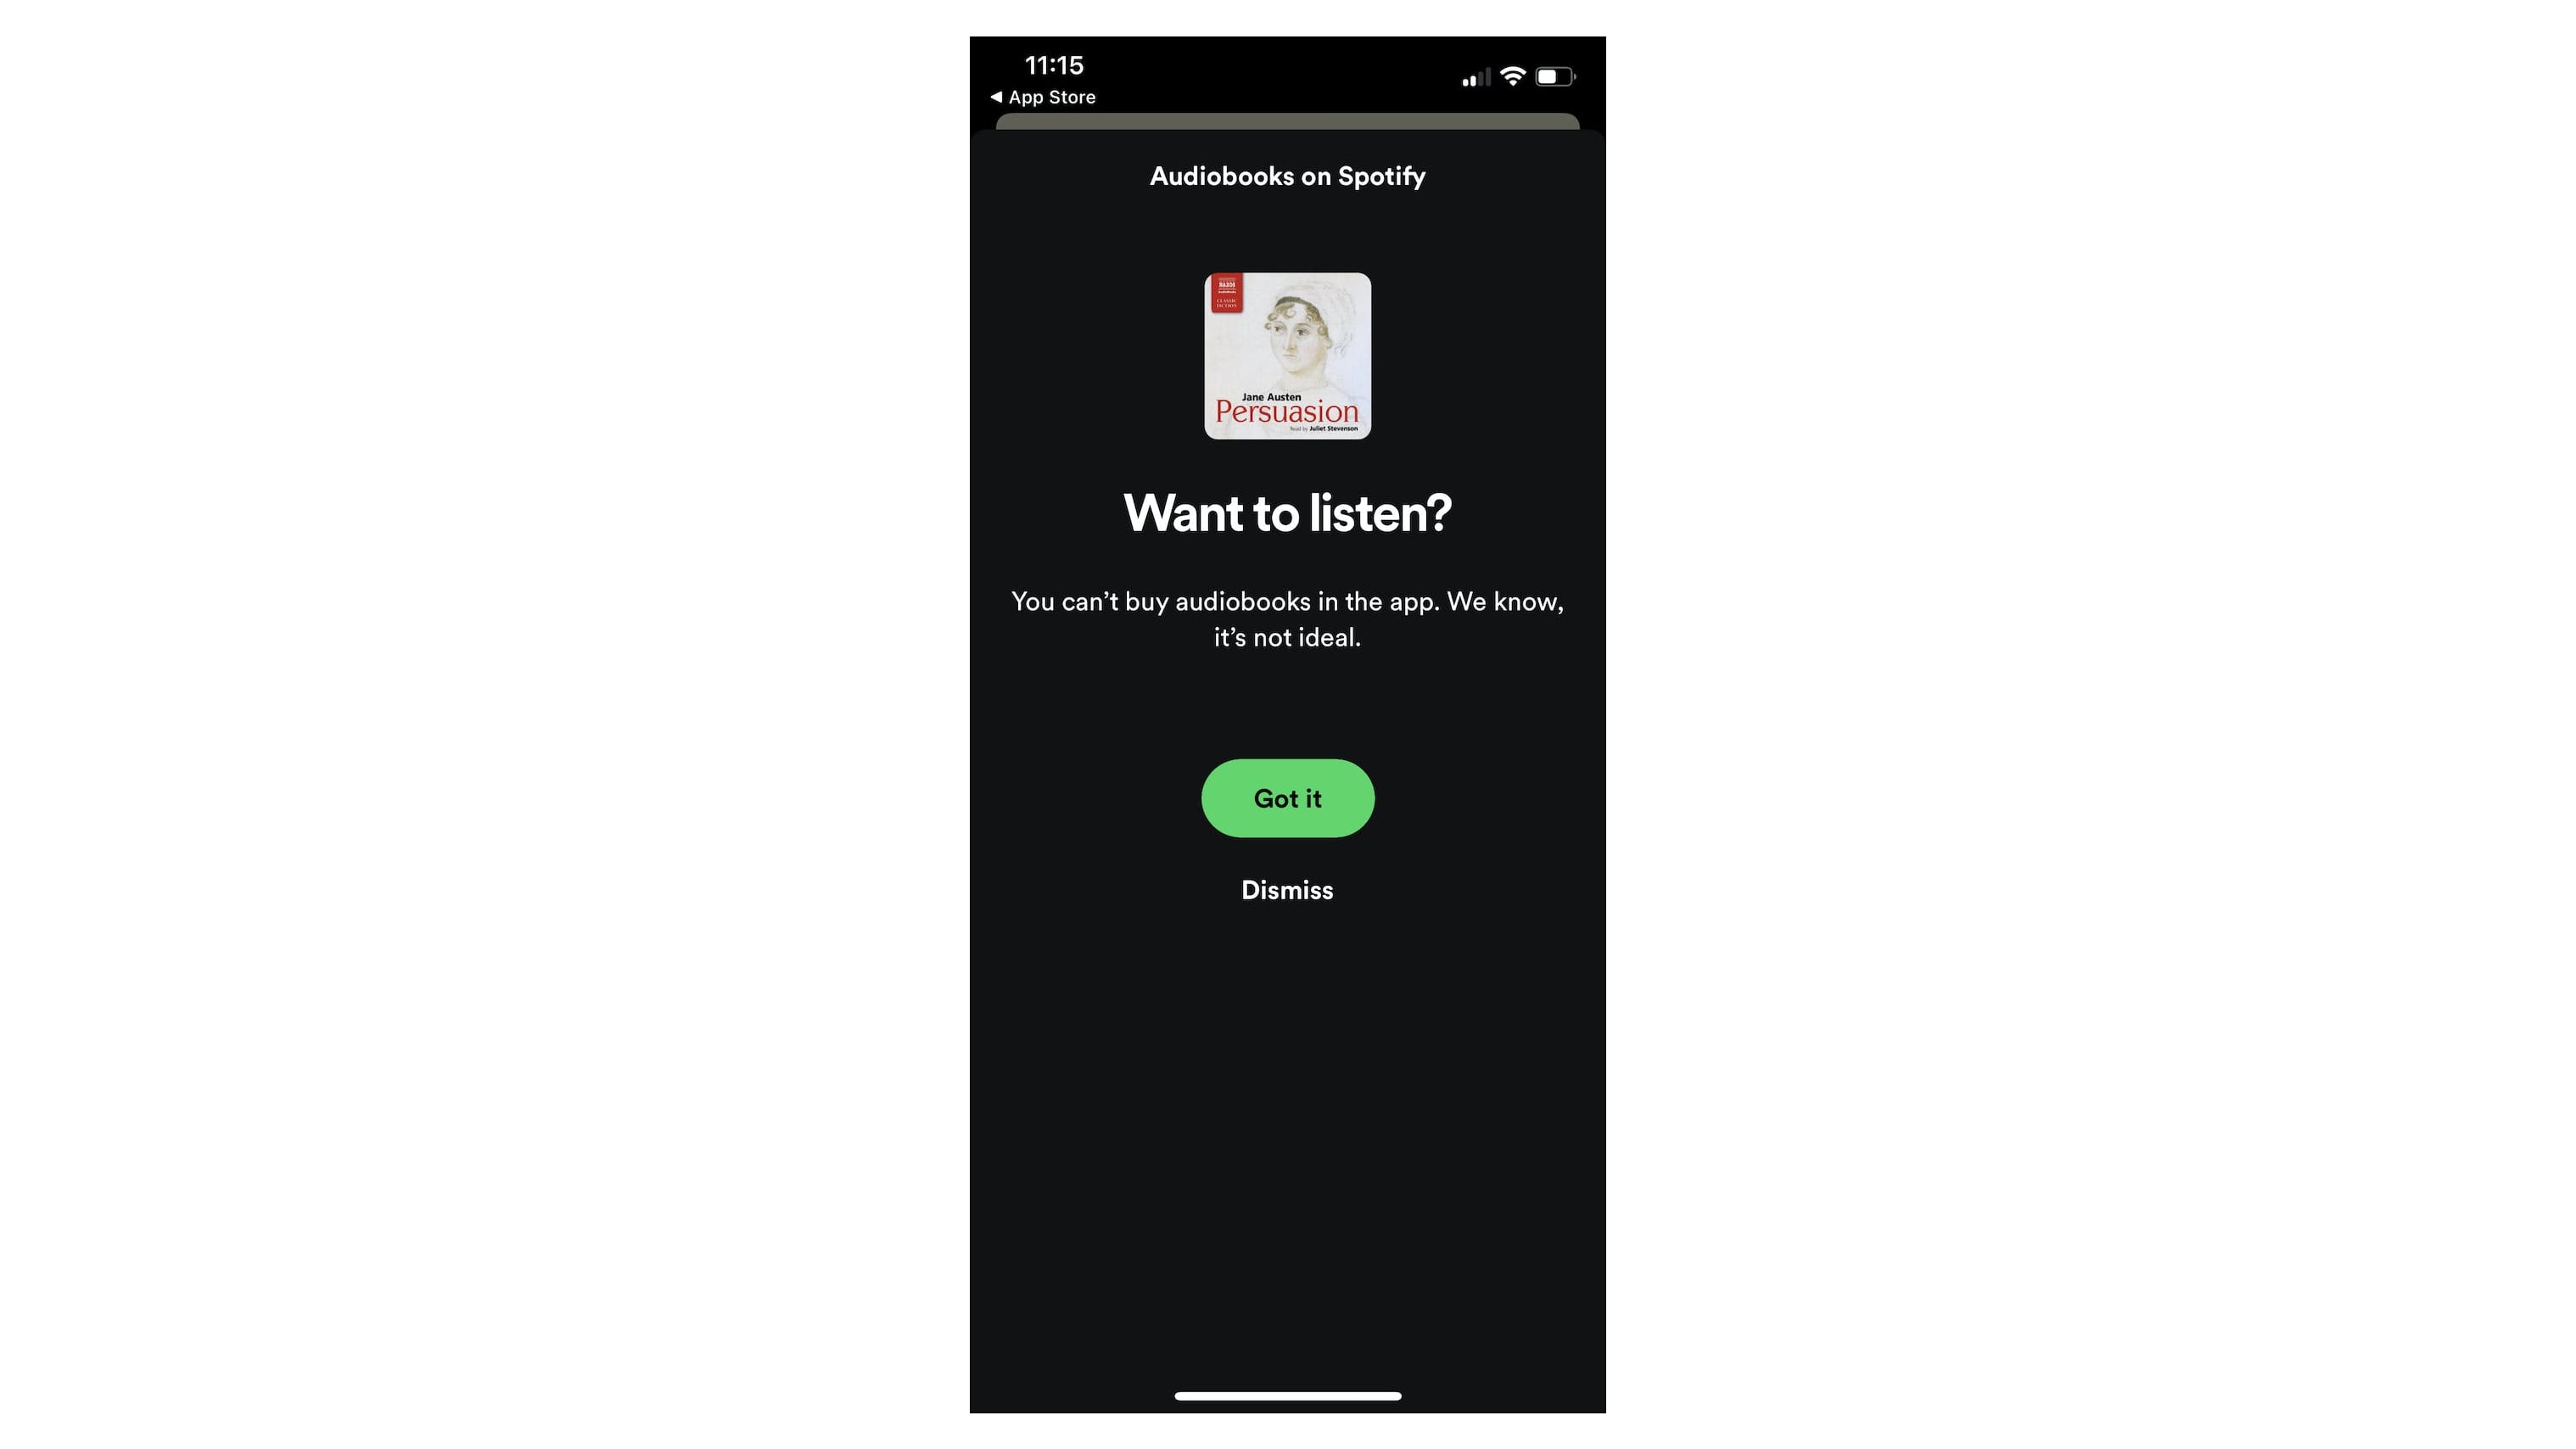 Spotify for iPhone screenshot showing a message the user sees when trying to buy an audiobook through the app